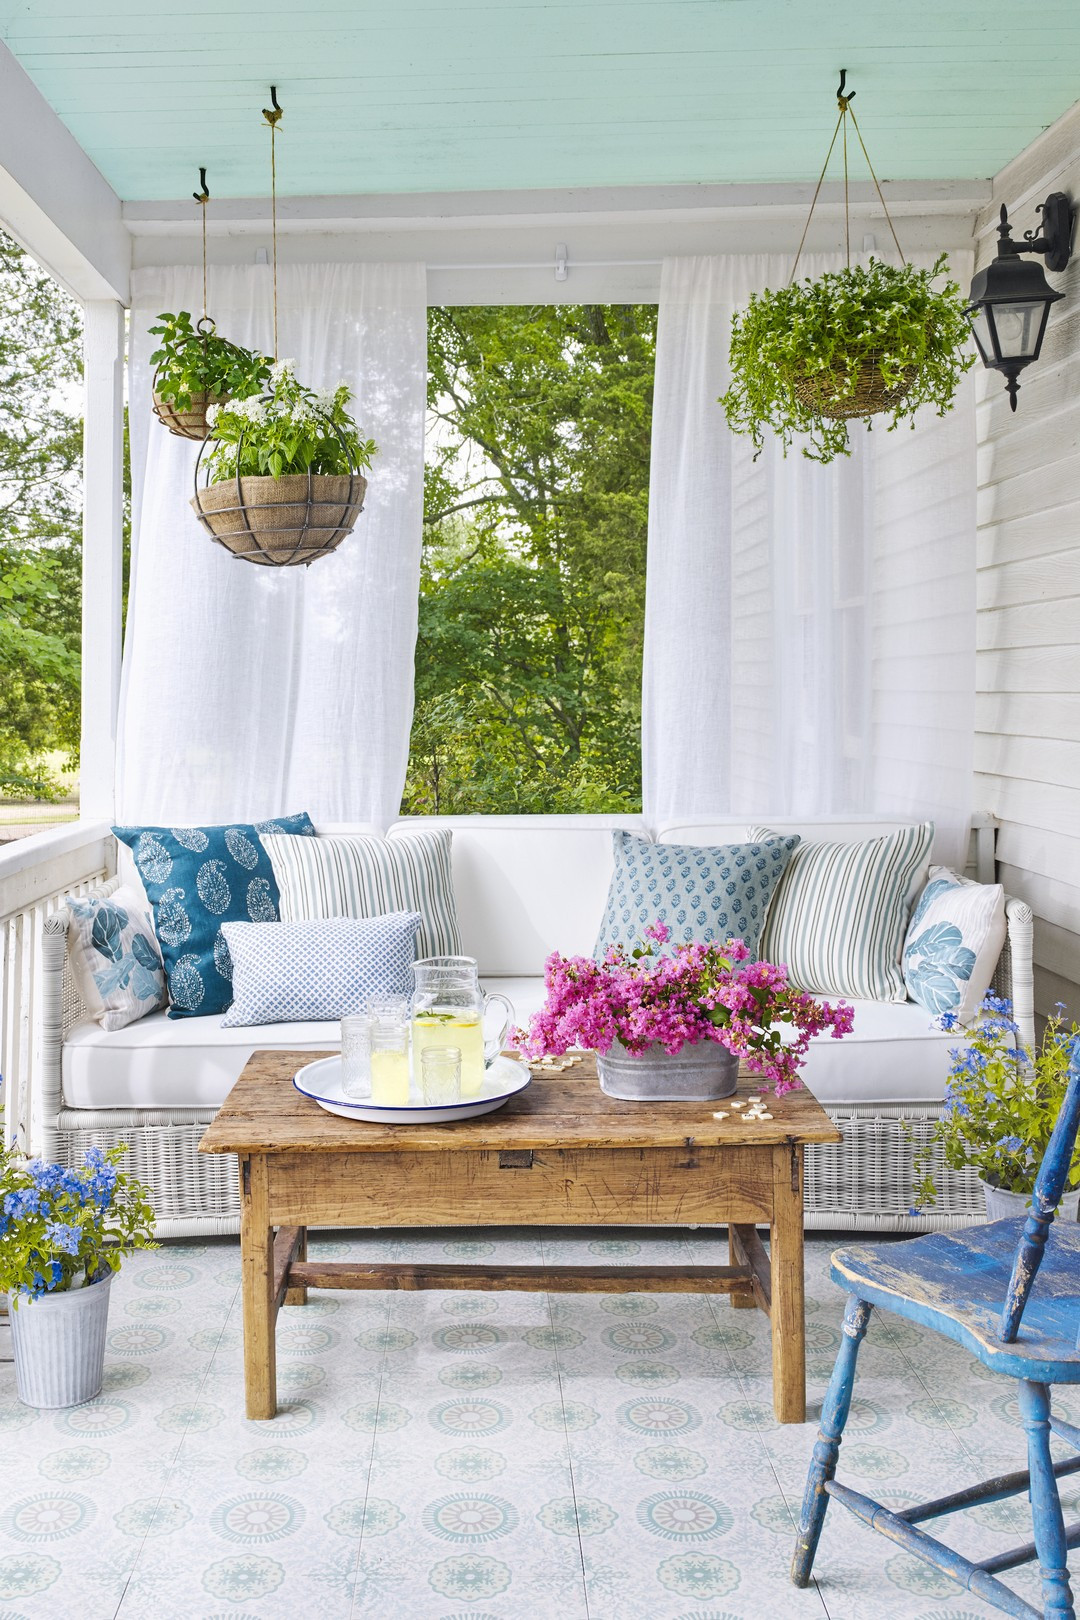 Spring Ideas Pictures
 Pretty Spring Front Porch Decorating Ideas echitecture